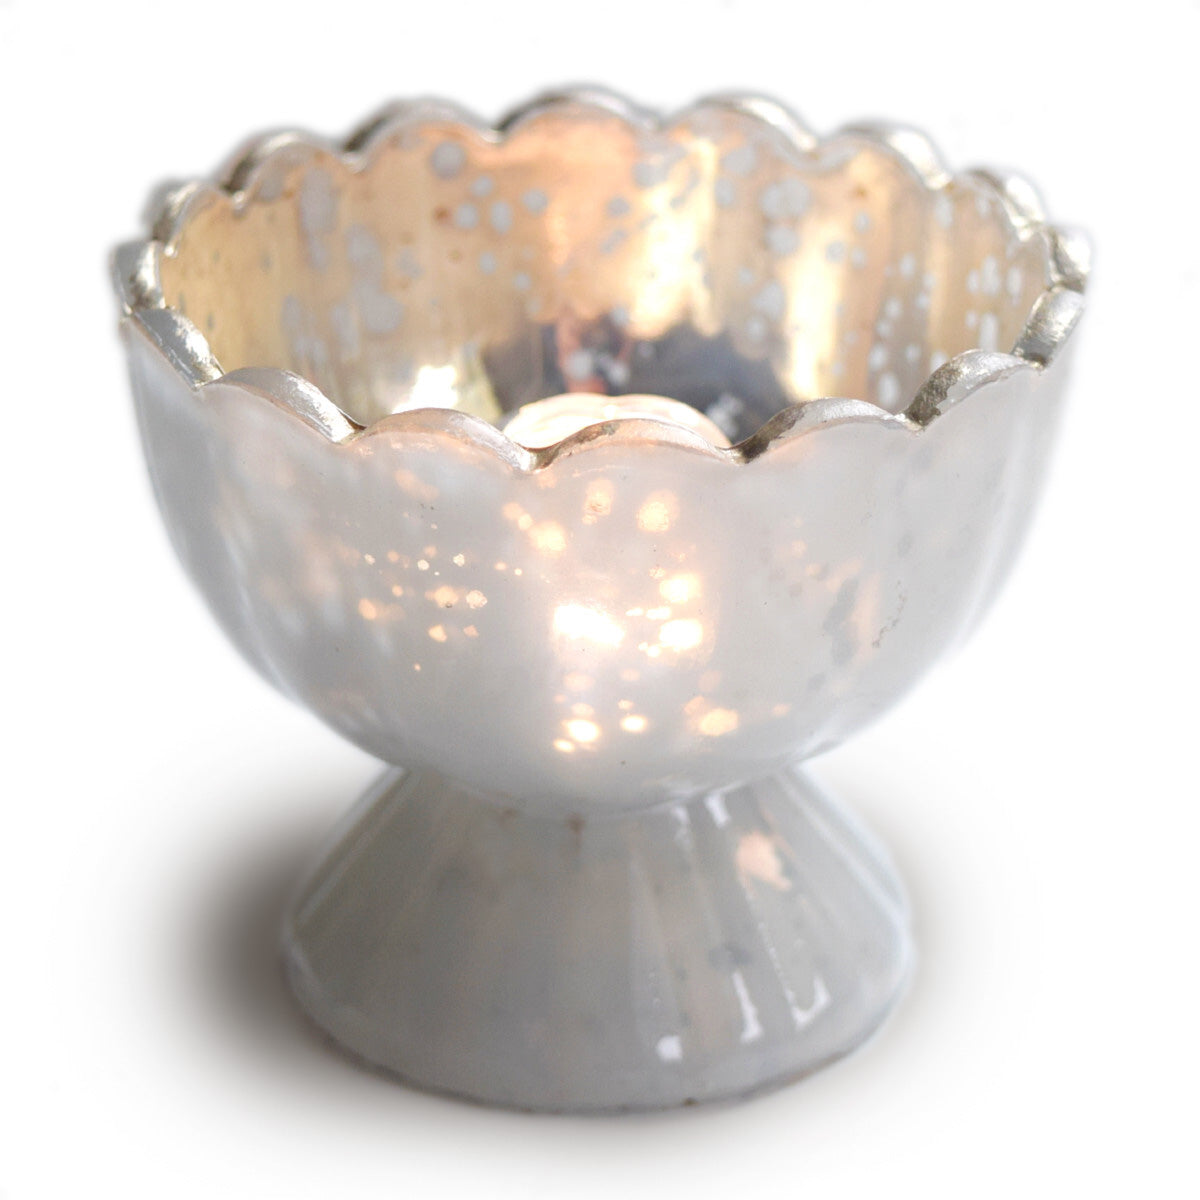 BLOWOUT (20 PACK) Vintage Mercury Glass Candle Holder (3-Inch, Suzanne Design, Sundae Cup Motif, Pearl White) - For Use with Tea Lights - Home Decor and Wedding Decorations